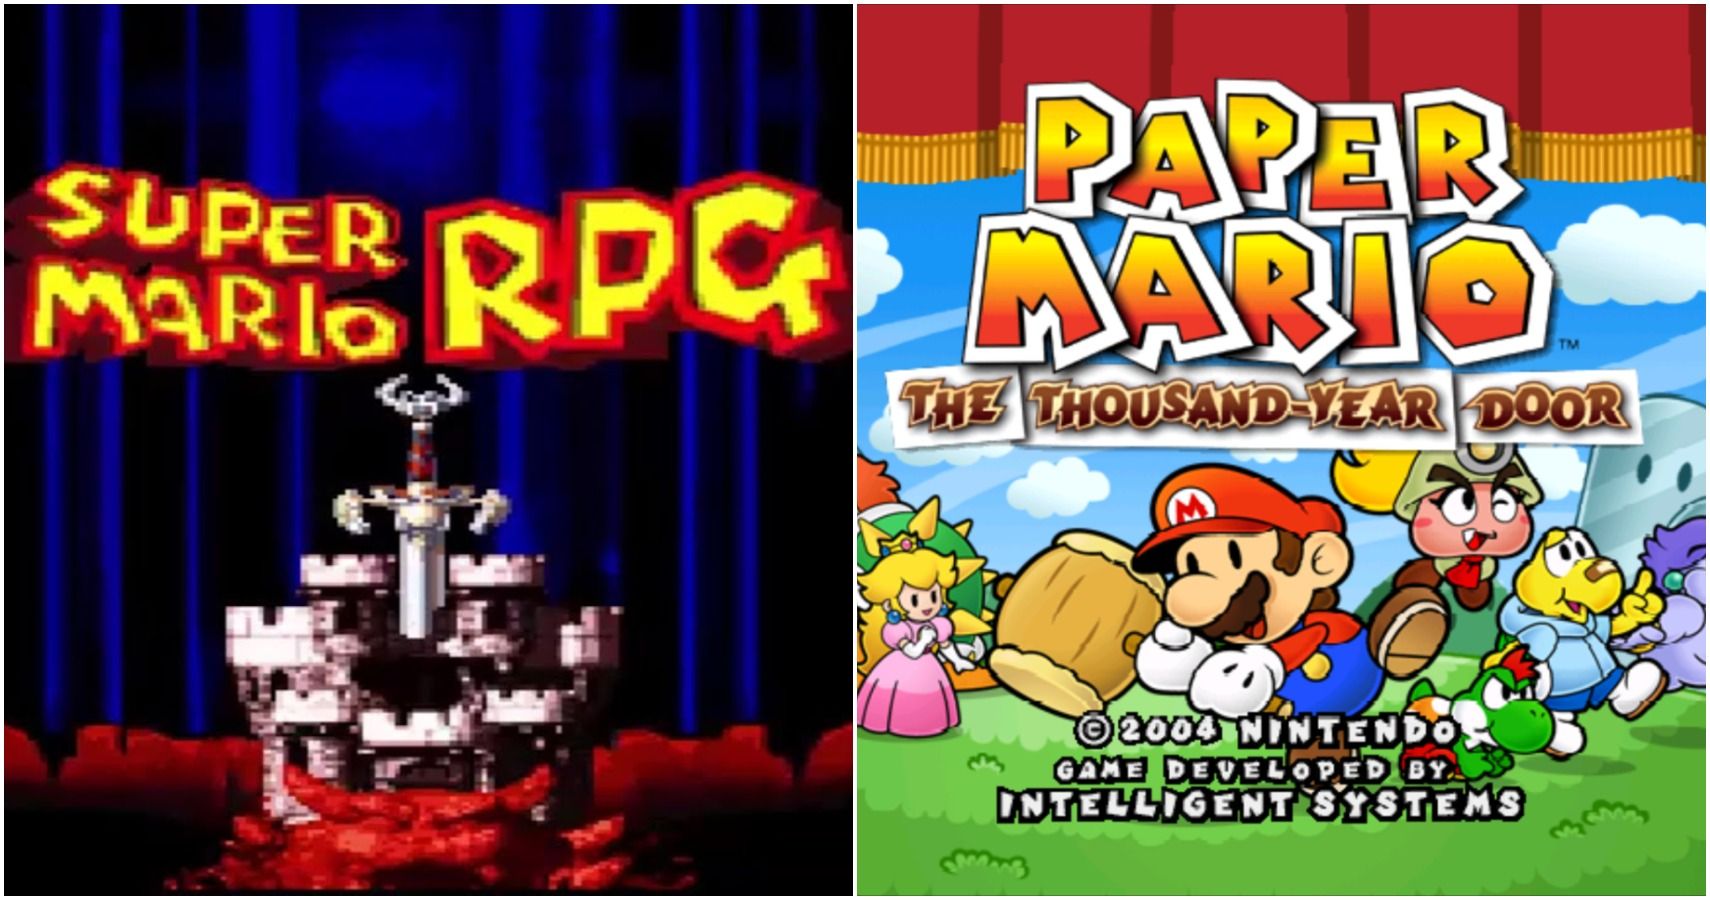 Why Super Mario RPG Is Still The Best